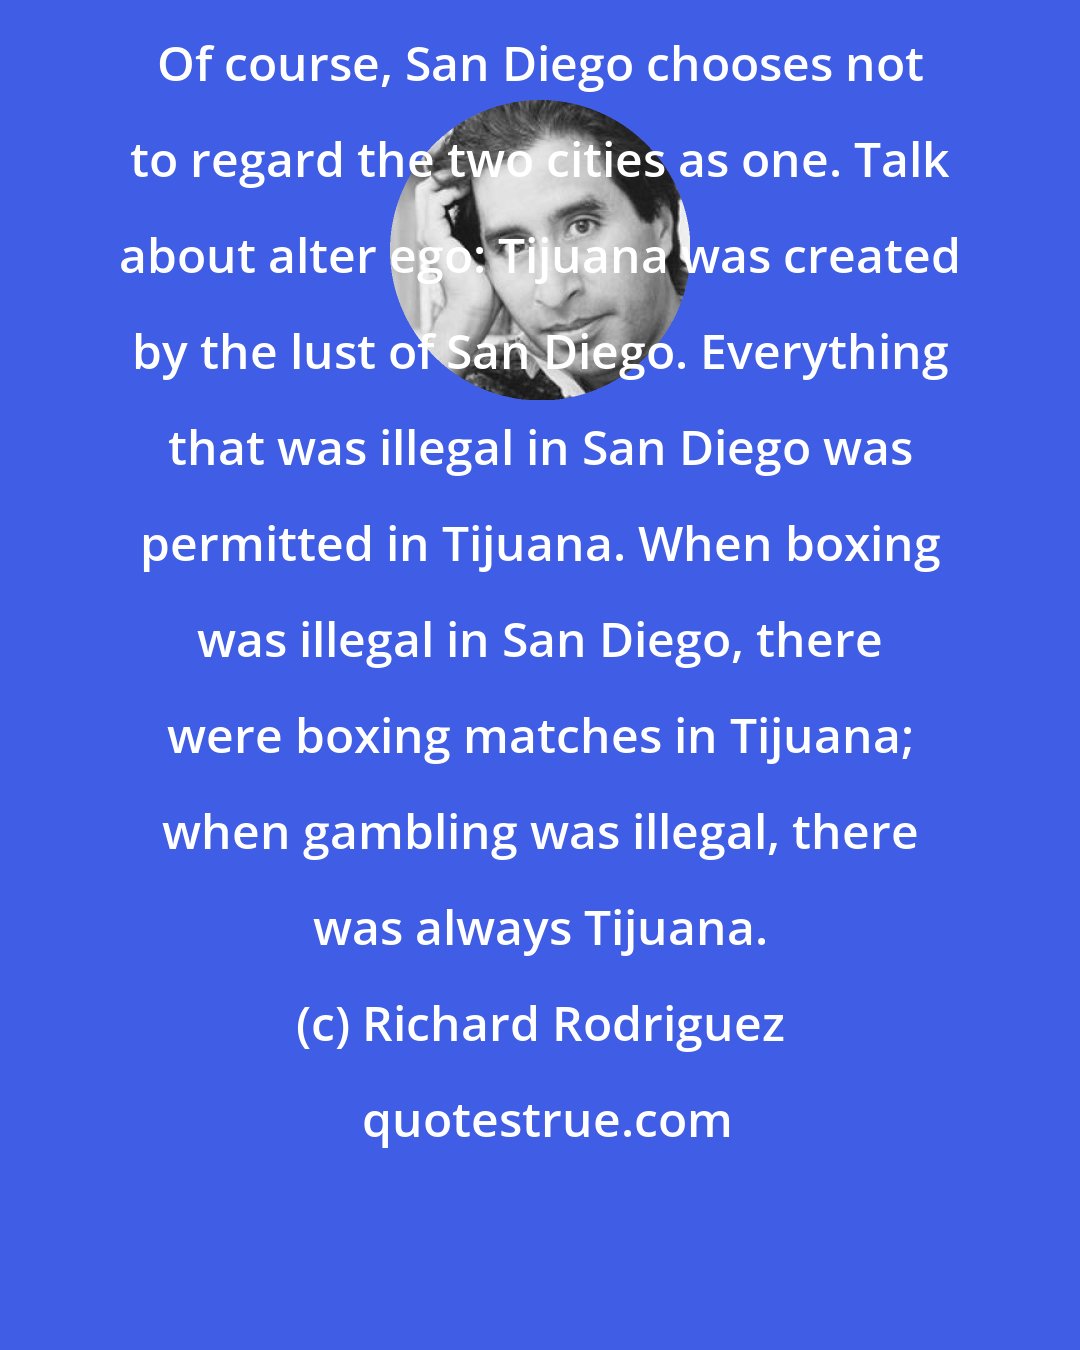 Richard Rodriguez: Of course, San Diego chooses not to regard the two cities as one. Talk about alter ego: Tijuana was created by the lust of San Diego. Everything that was illegal in San Diego was permitted in Tijuana. When boxing was illegal in San Diego, there were boxing matches in Tijuana; when gambling was illegal, there was always Tijuana.